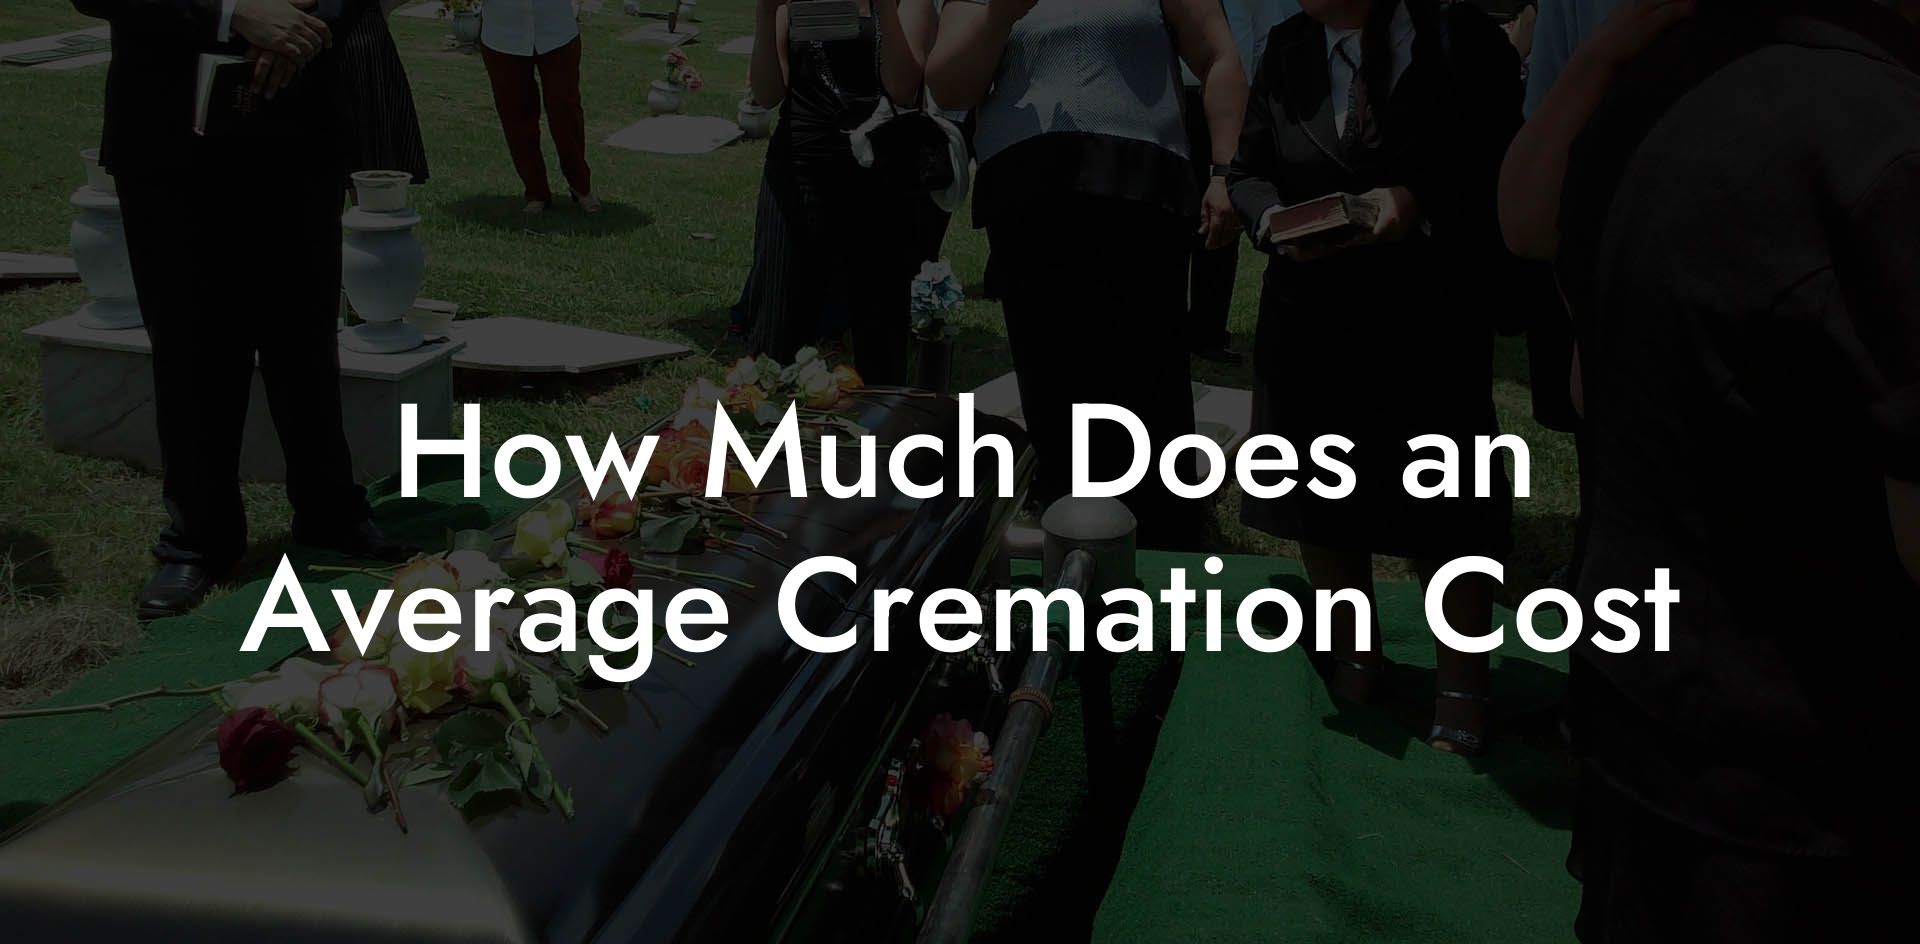 How Much Does an Average Cremation Cost